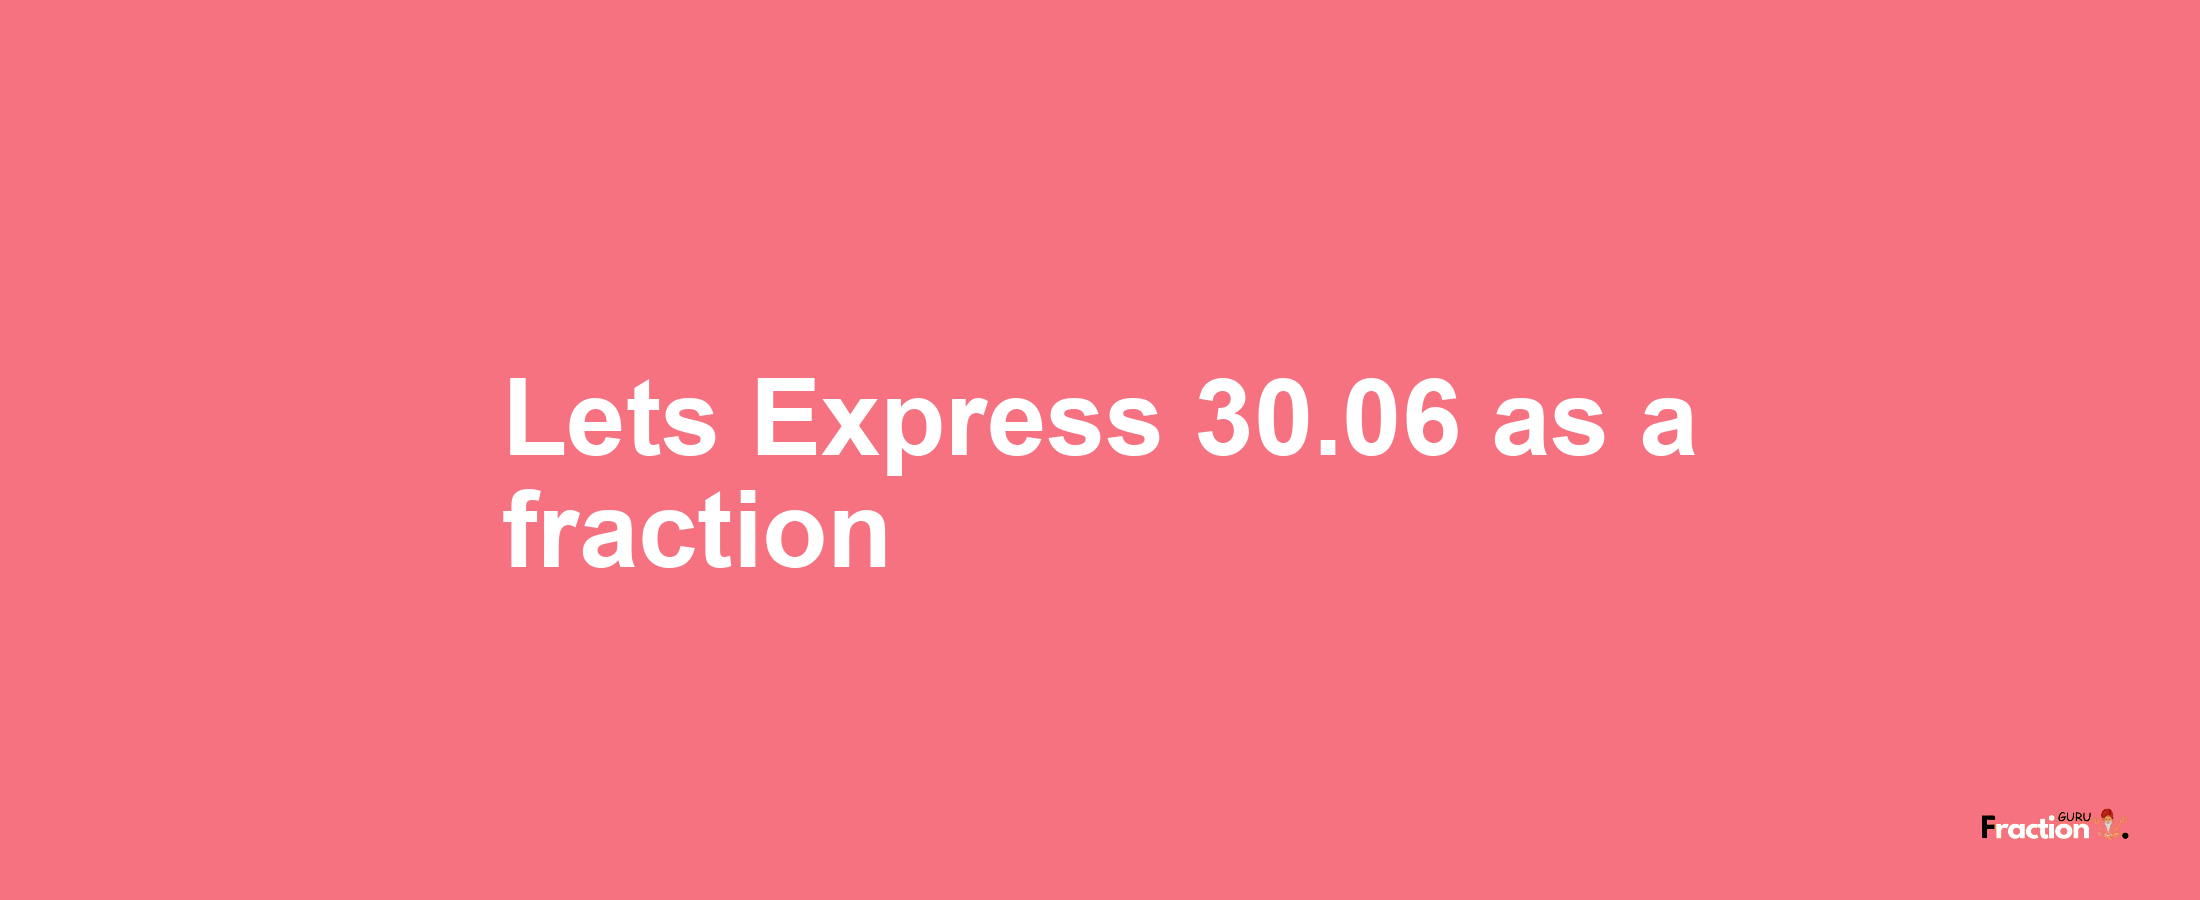 Lets Express 30.06 as afraction